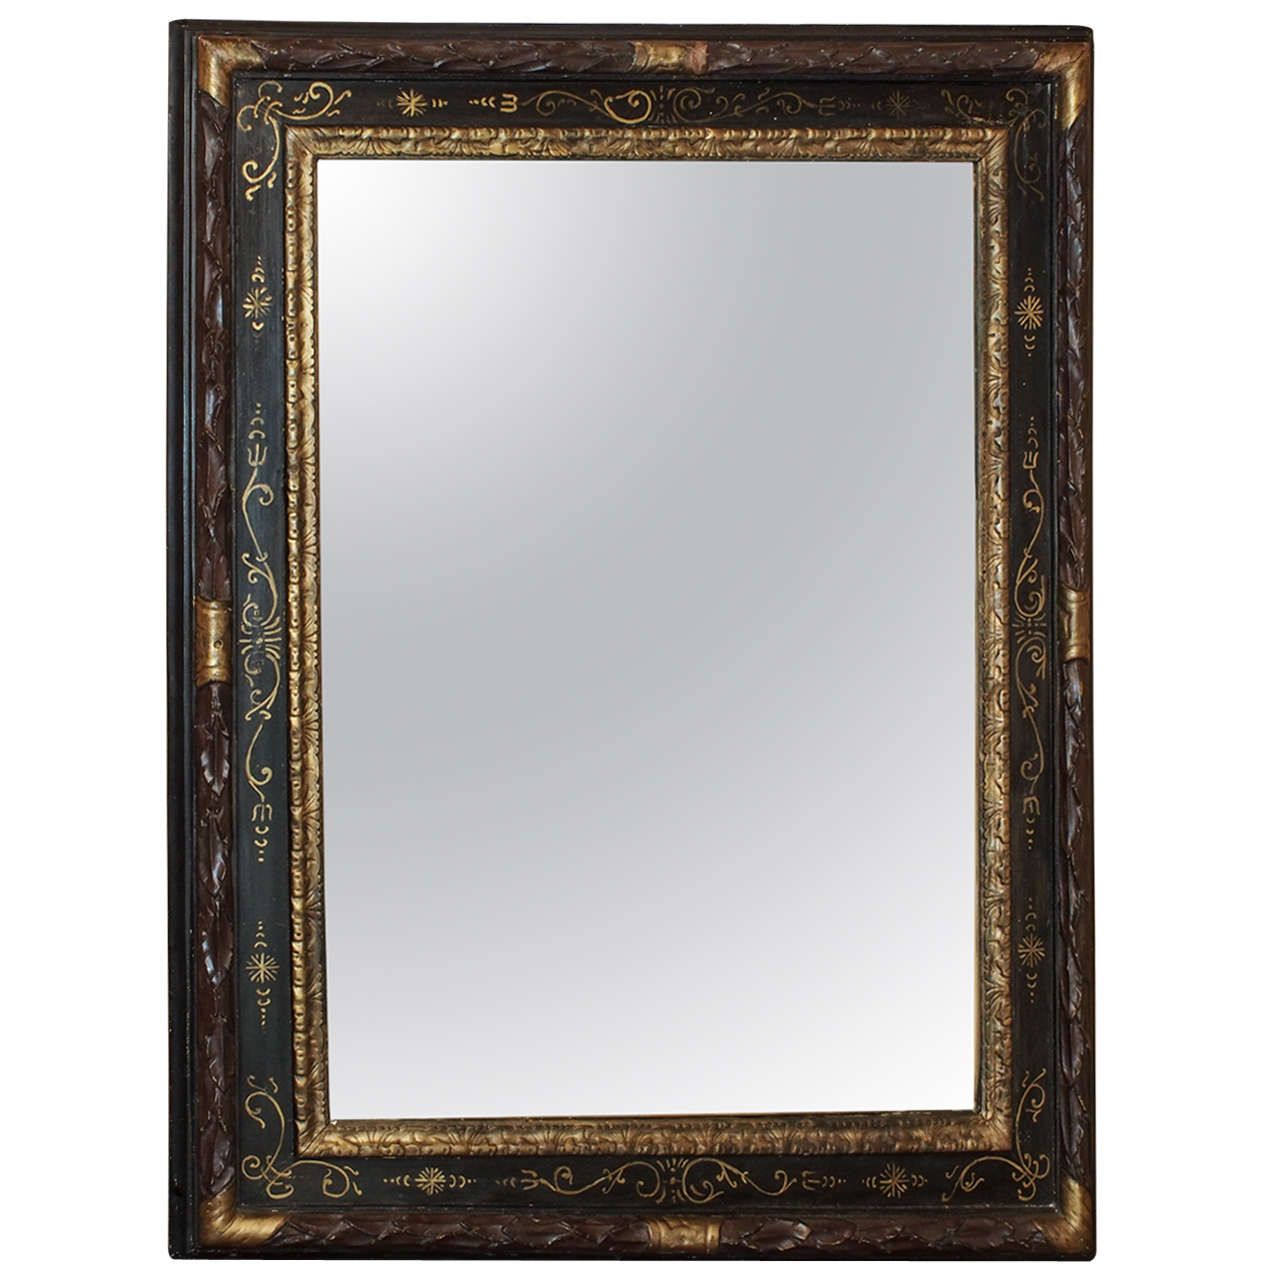 Late 19th c. French Black and Gold Gilded Wooden Mirror For Sale